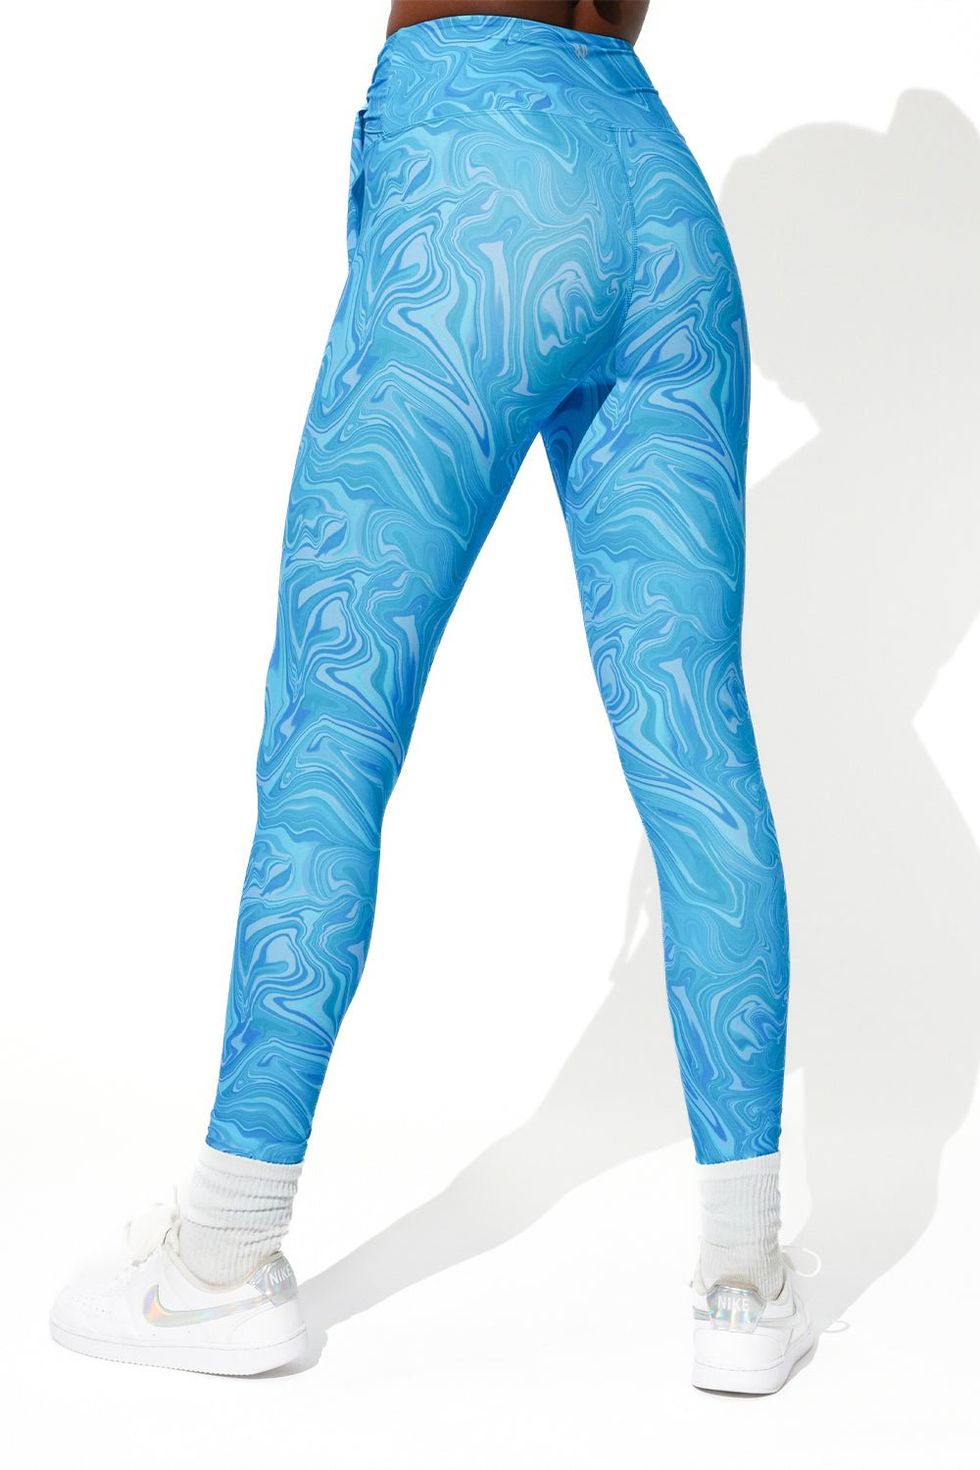 Hands Down, These Are The BEST Leggings For Yoga! - SHEfinds